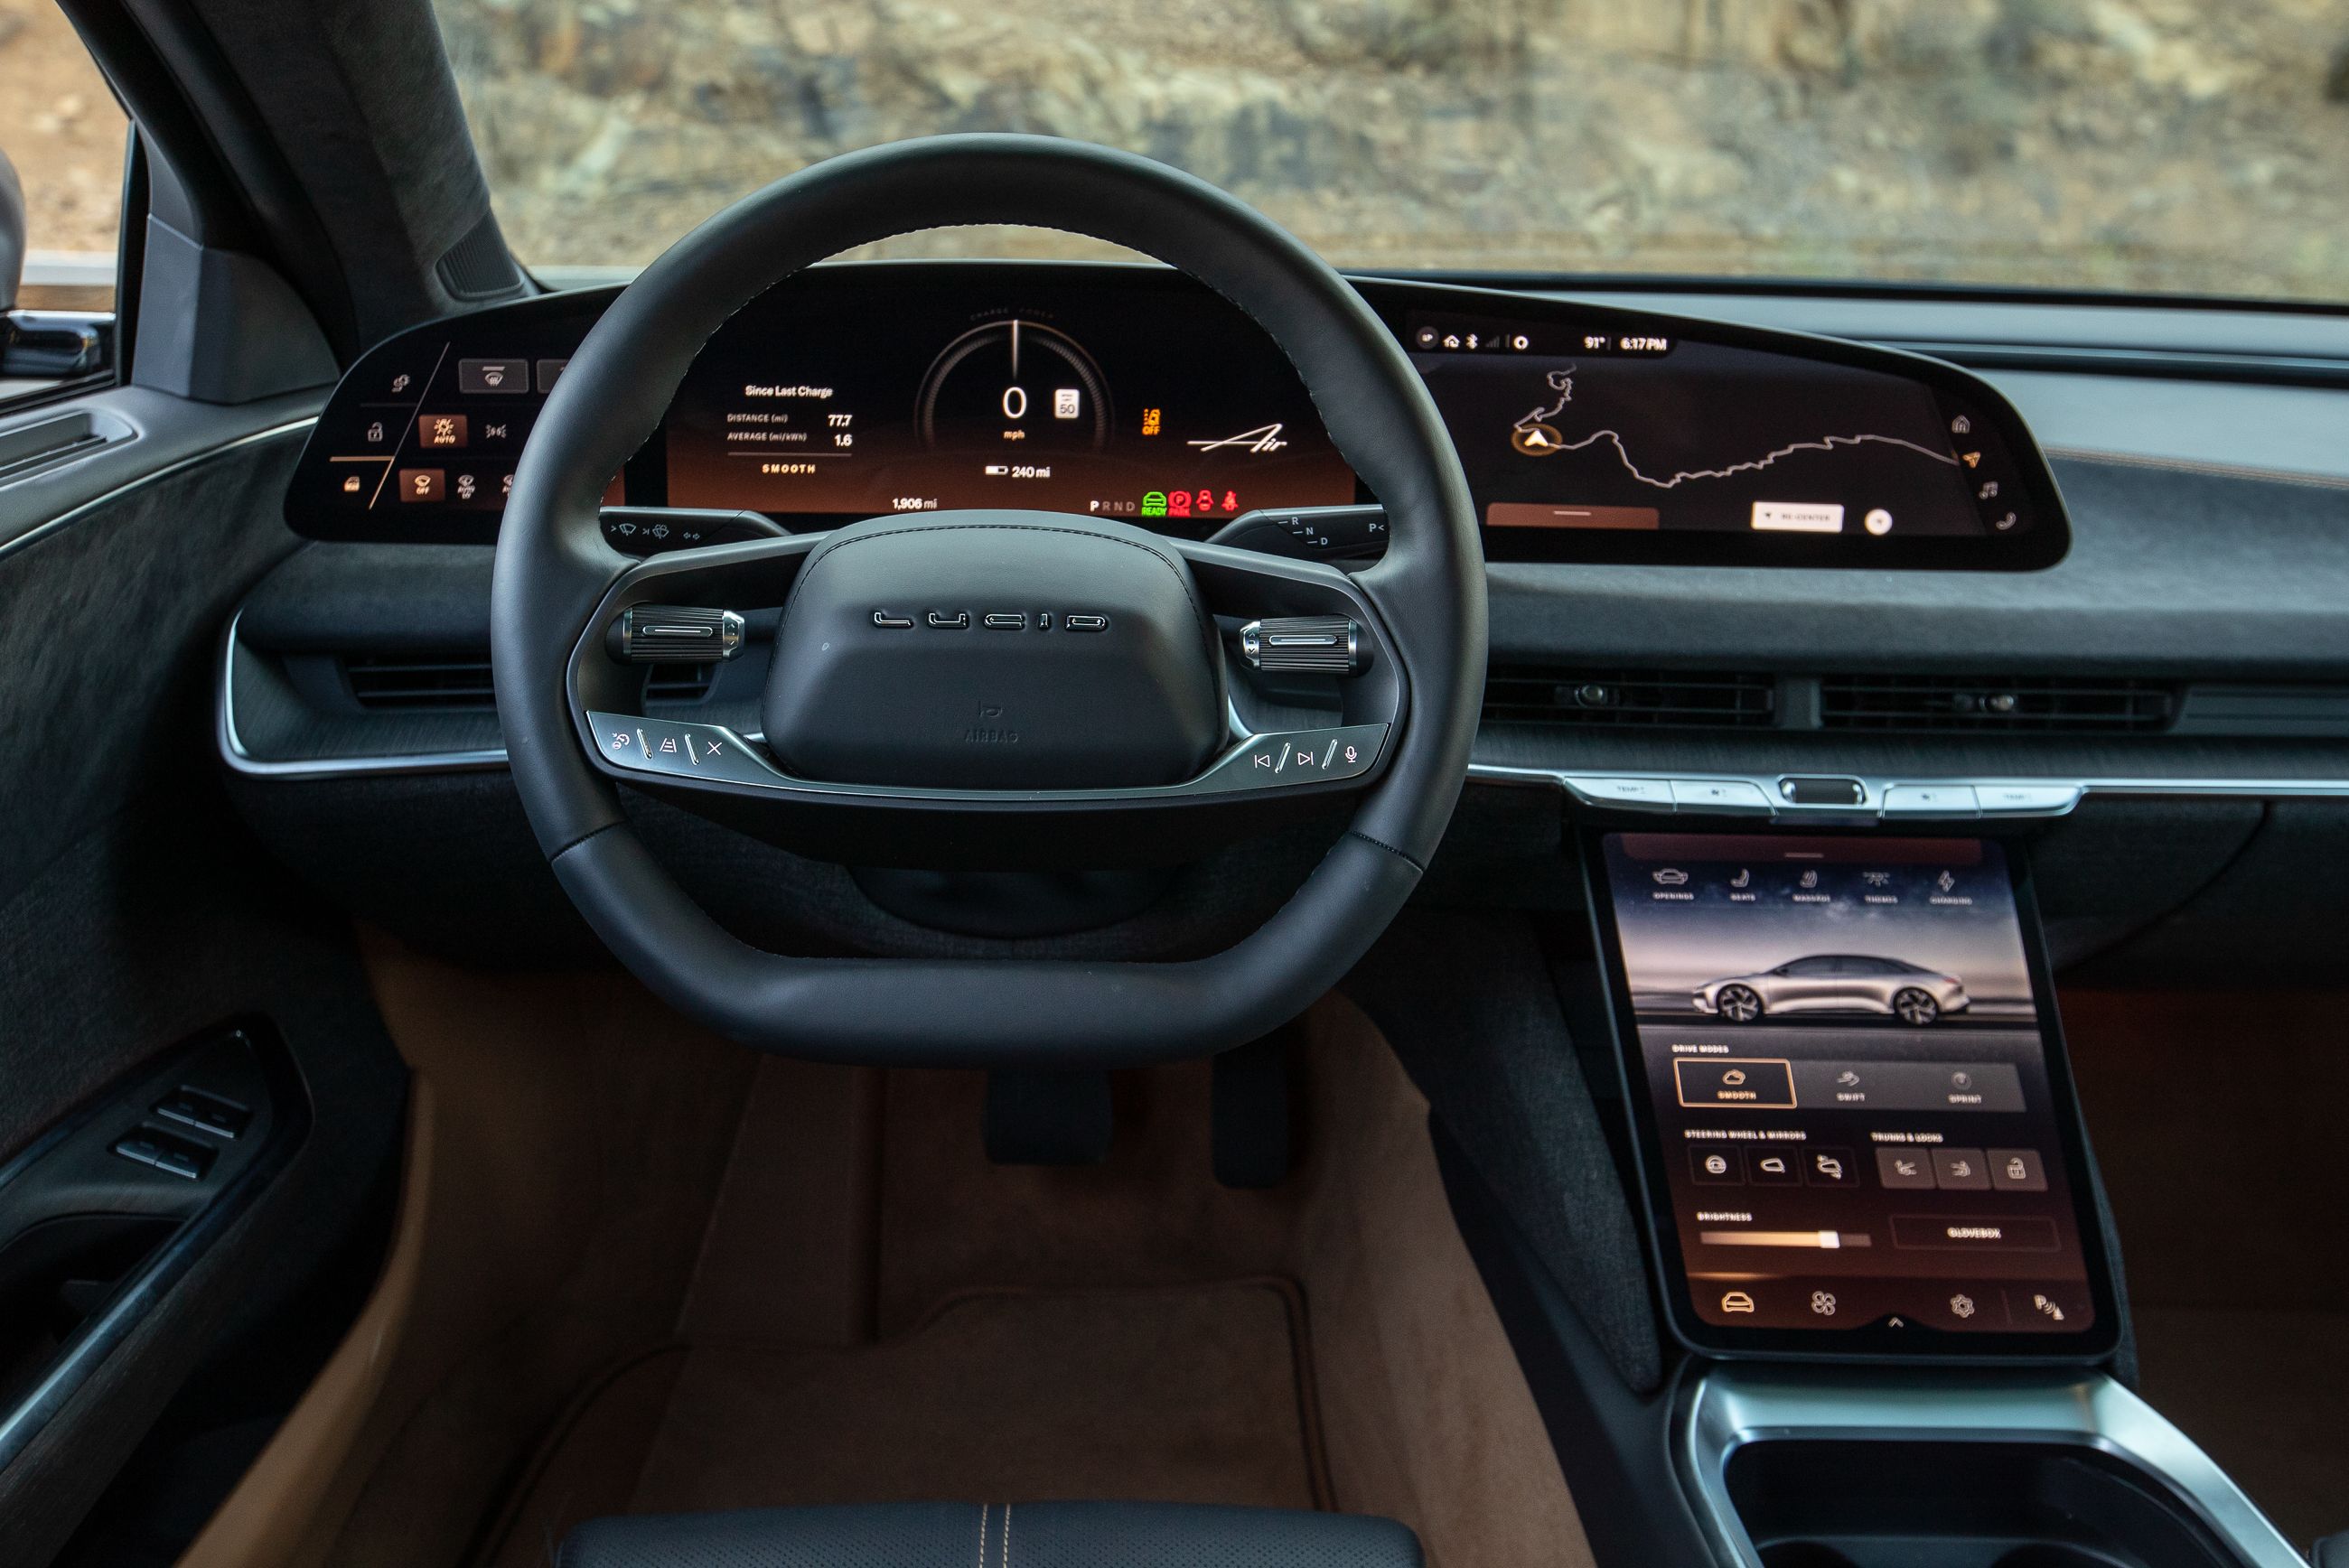 These are the 5 most luxurious car interiors in the world